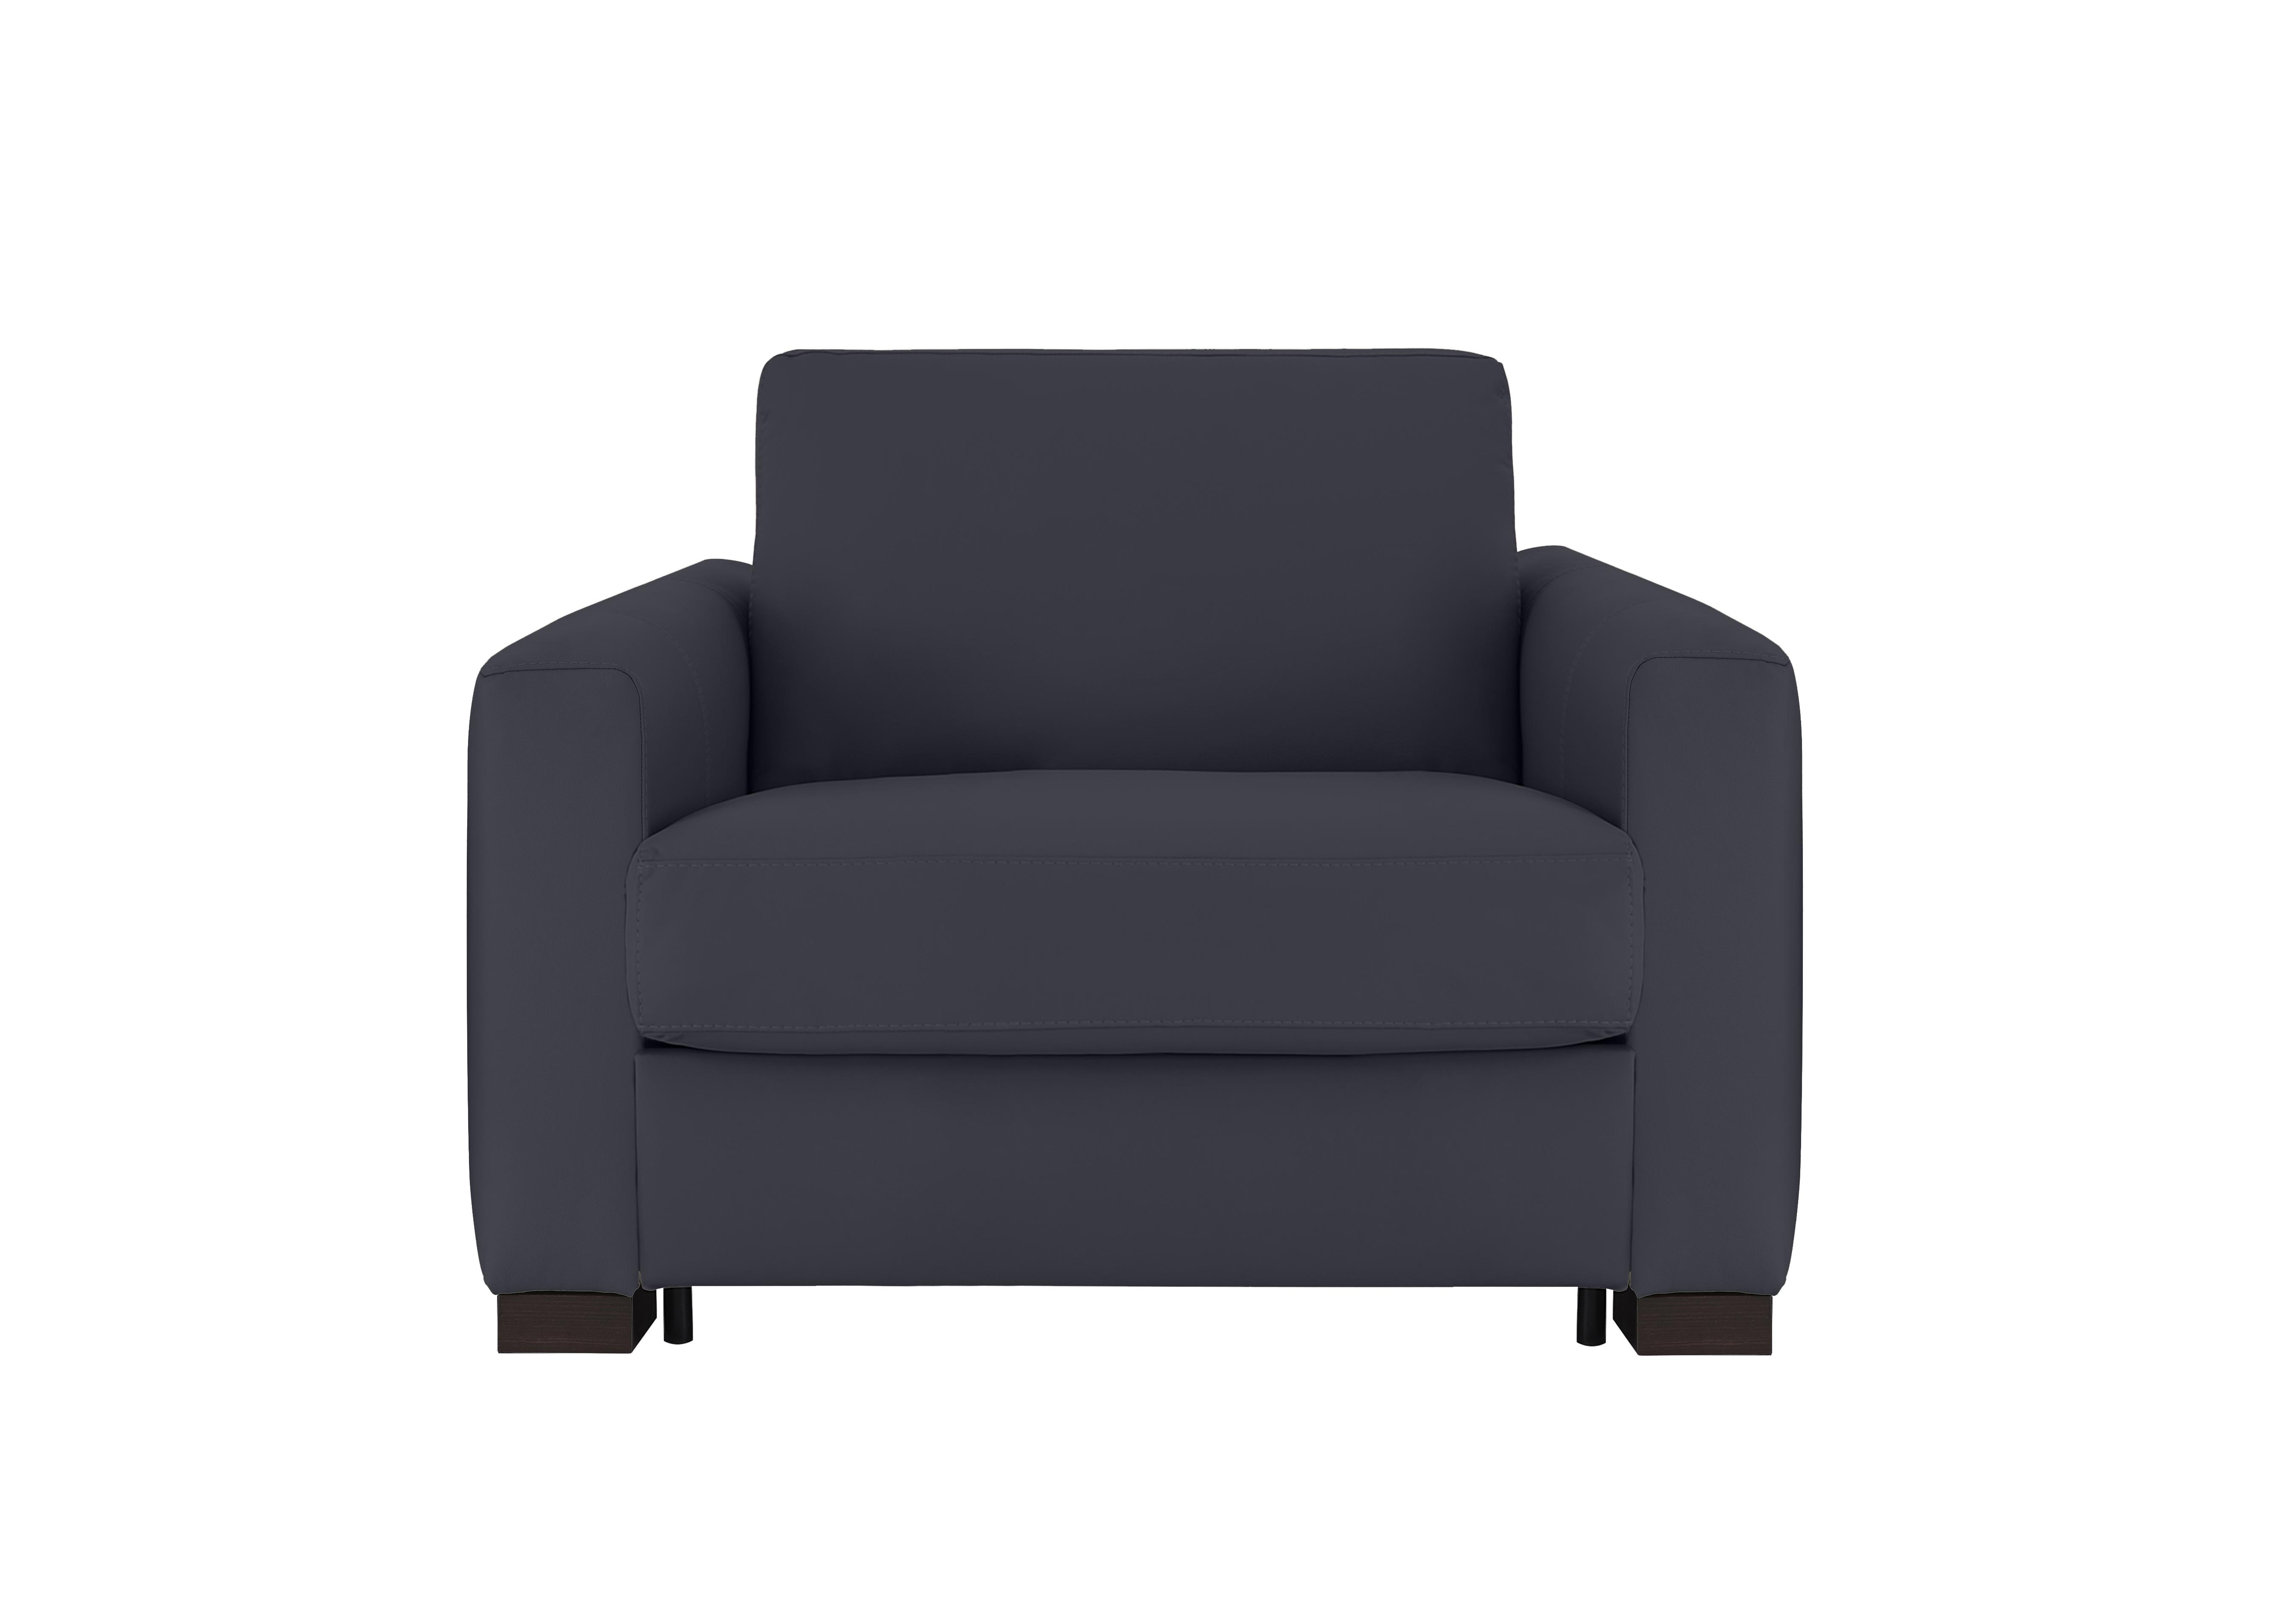 Alcova Leather Chair Sofa Bed with Box Arms in Torello Blu 81 on Furniture Village